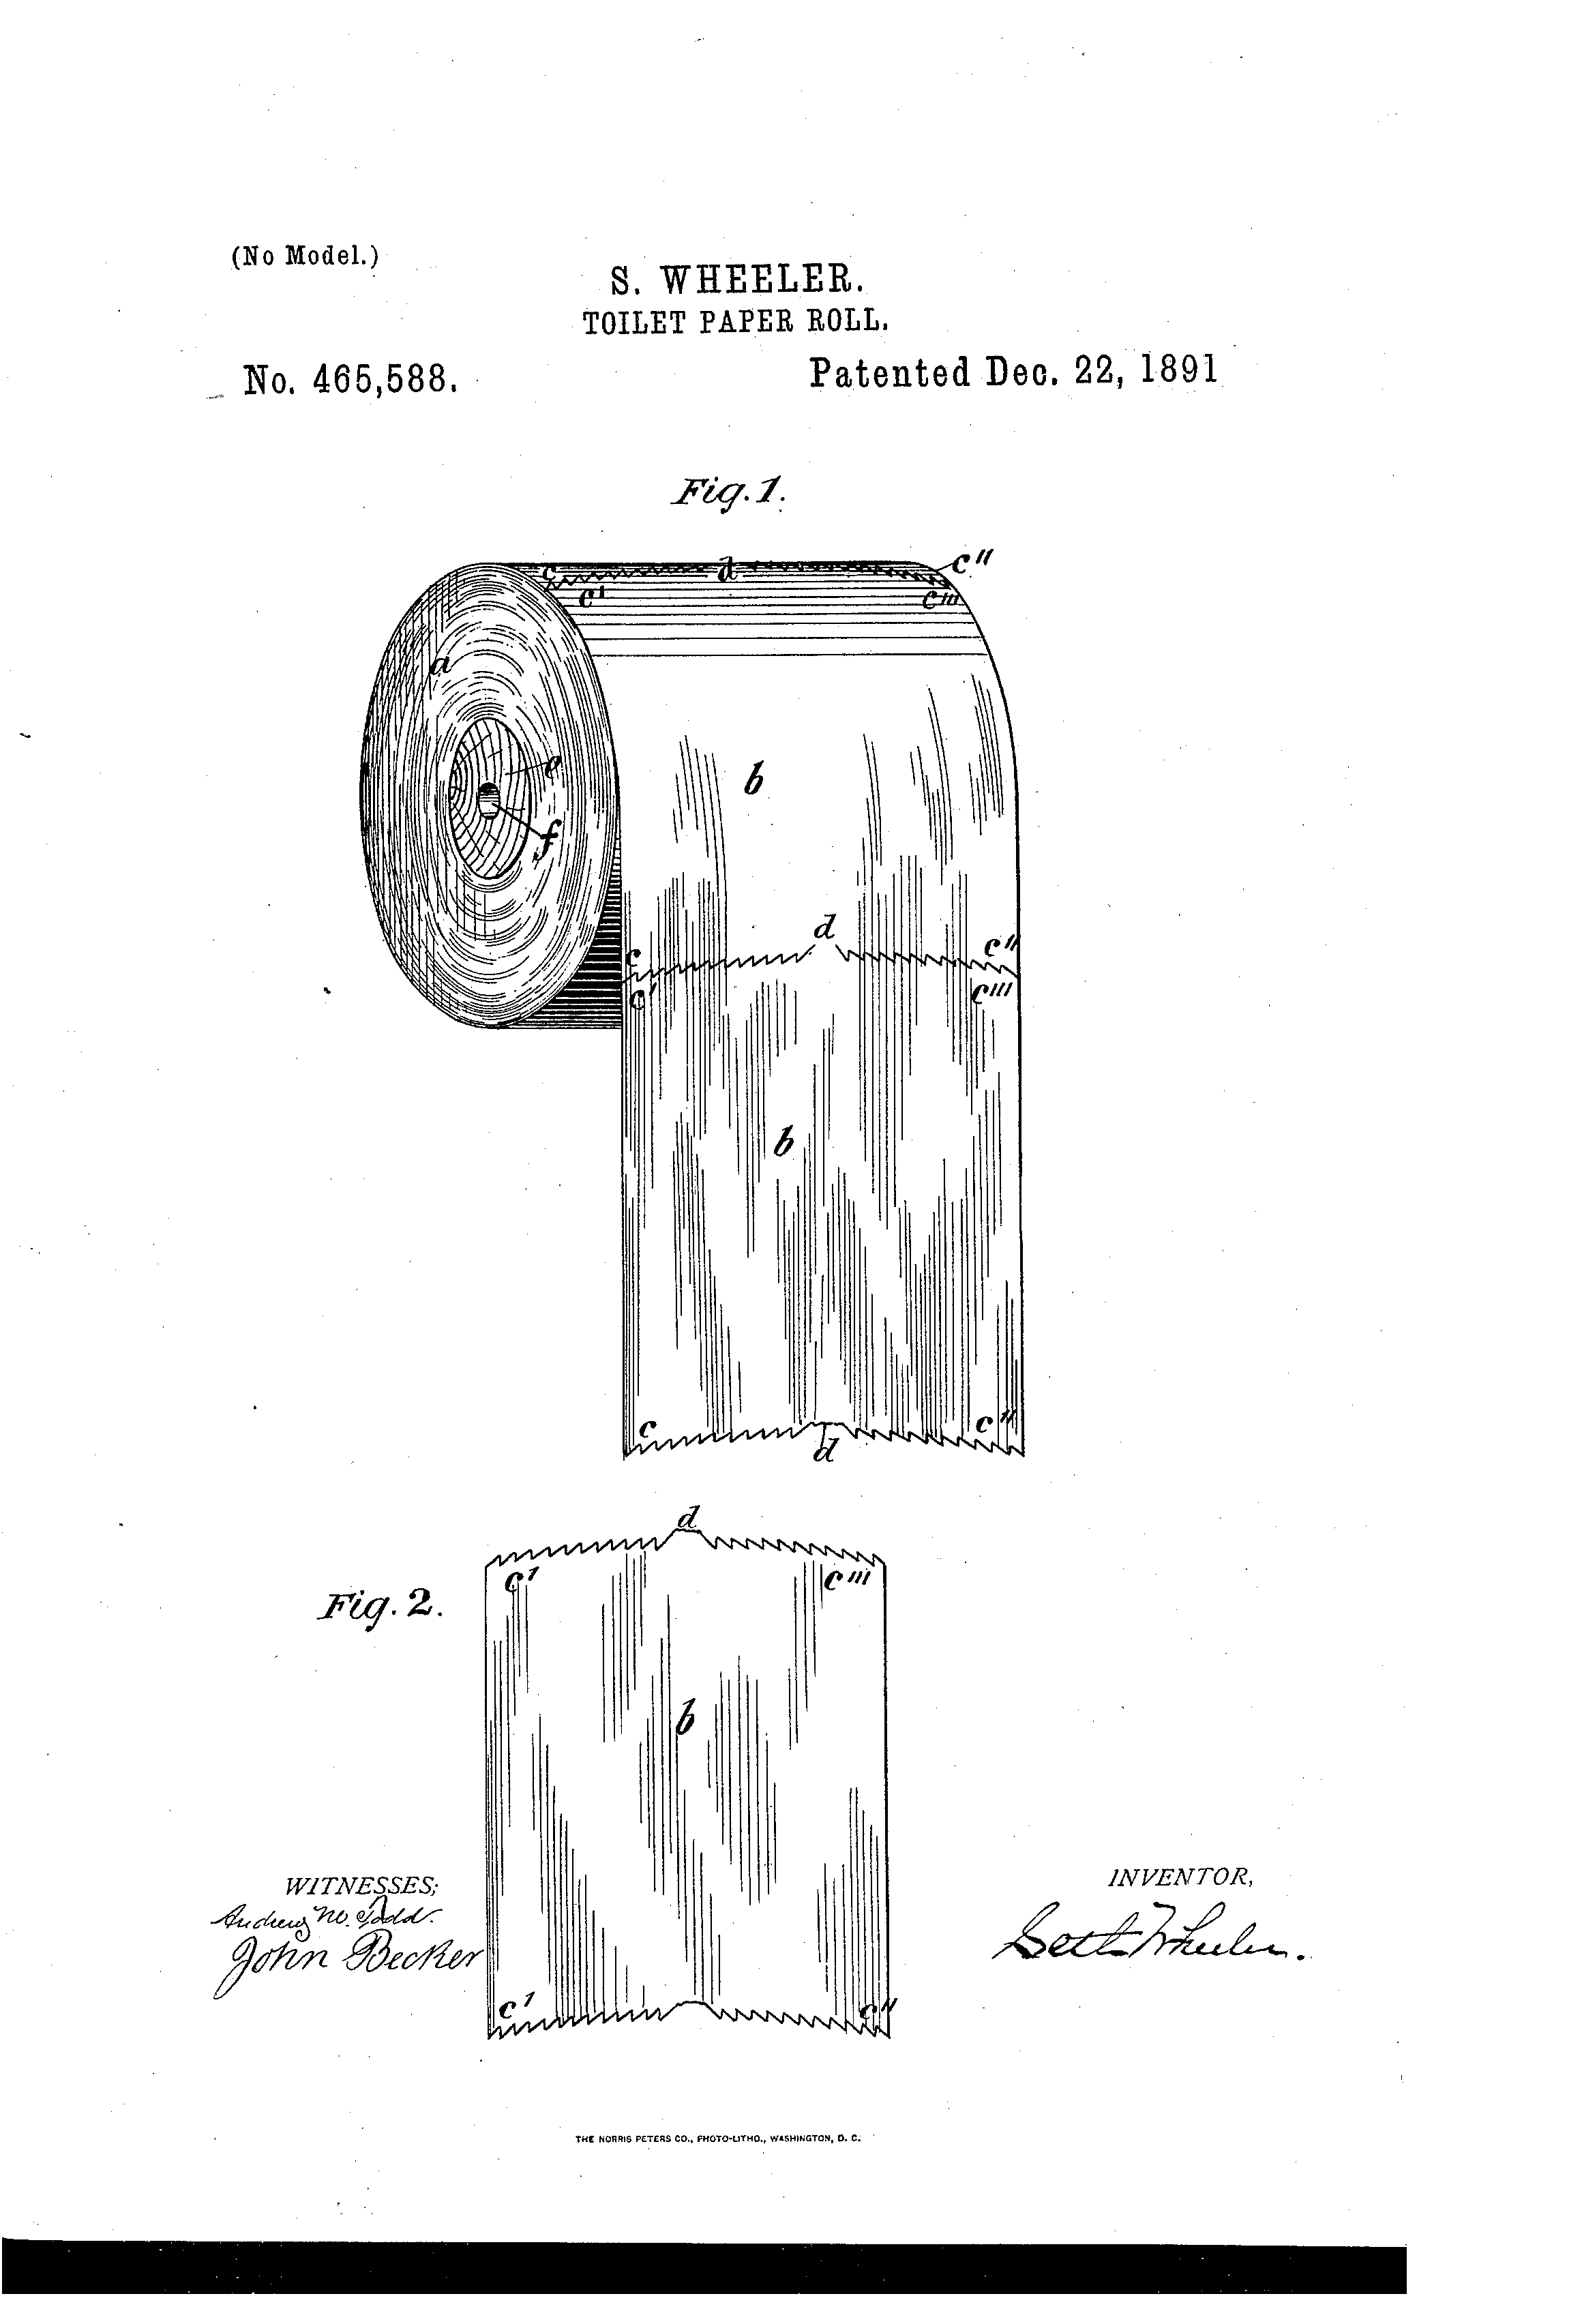 toilet-paper-patent.png